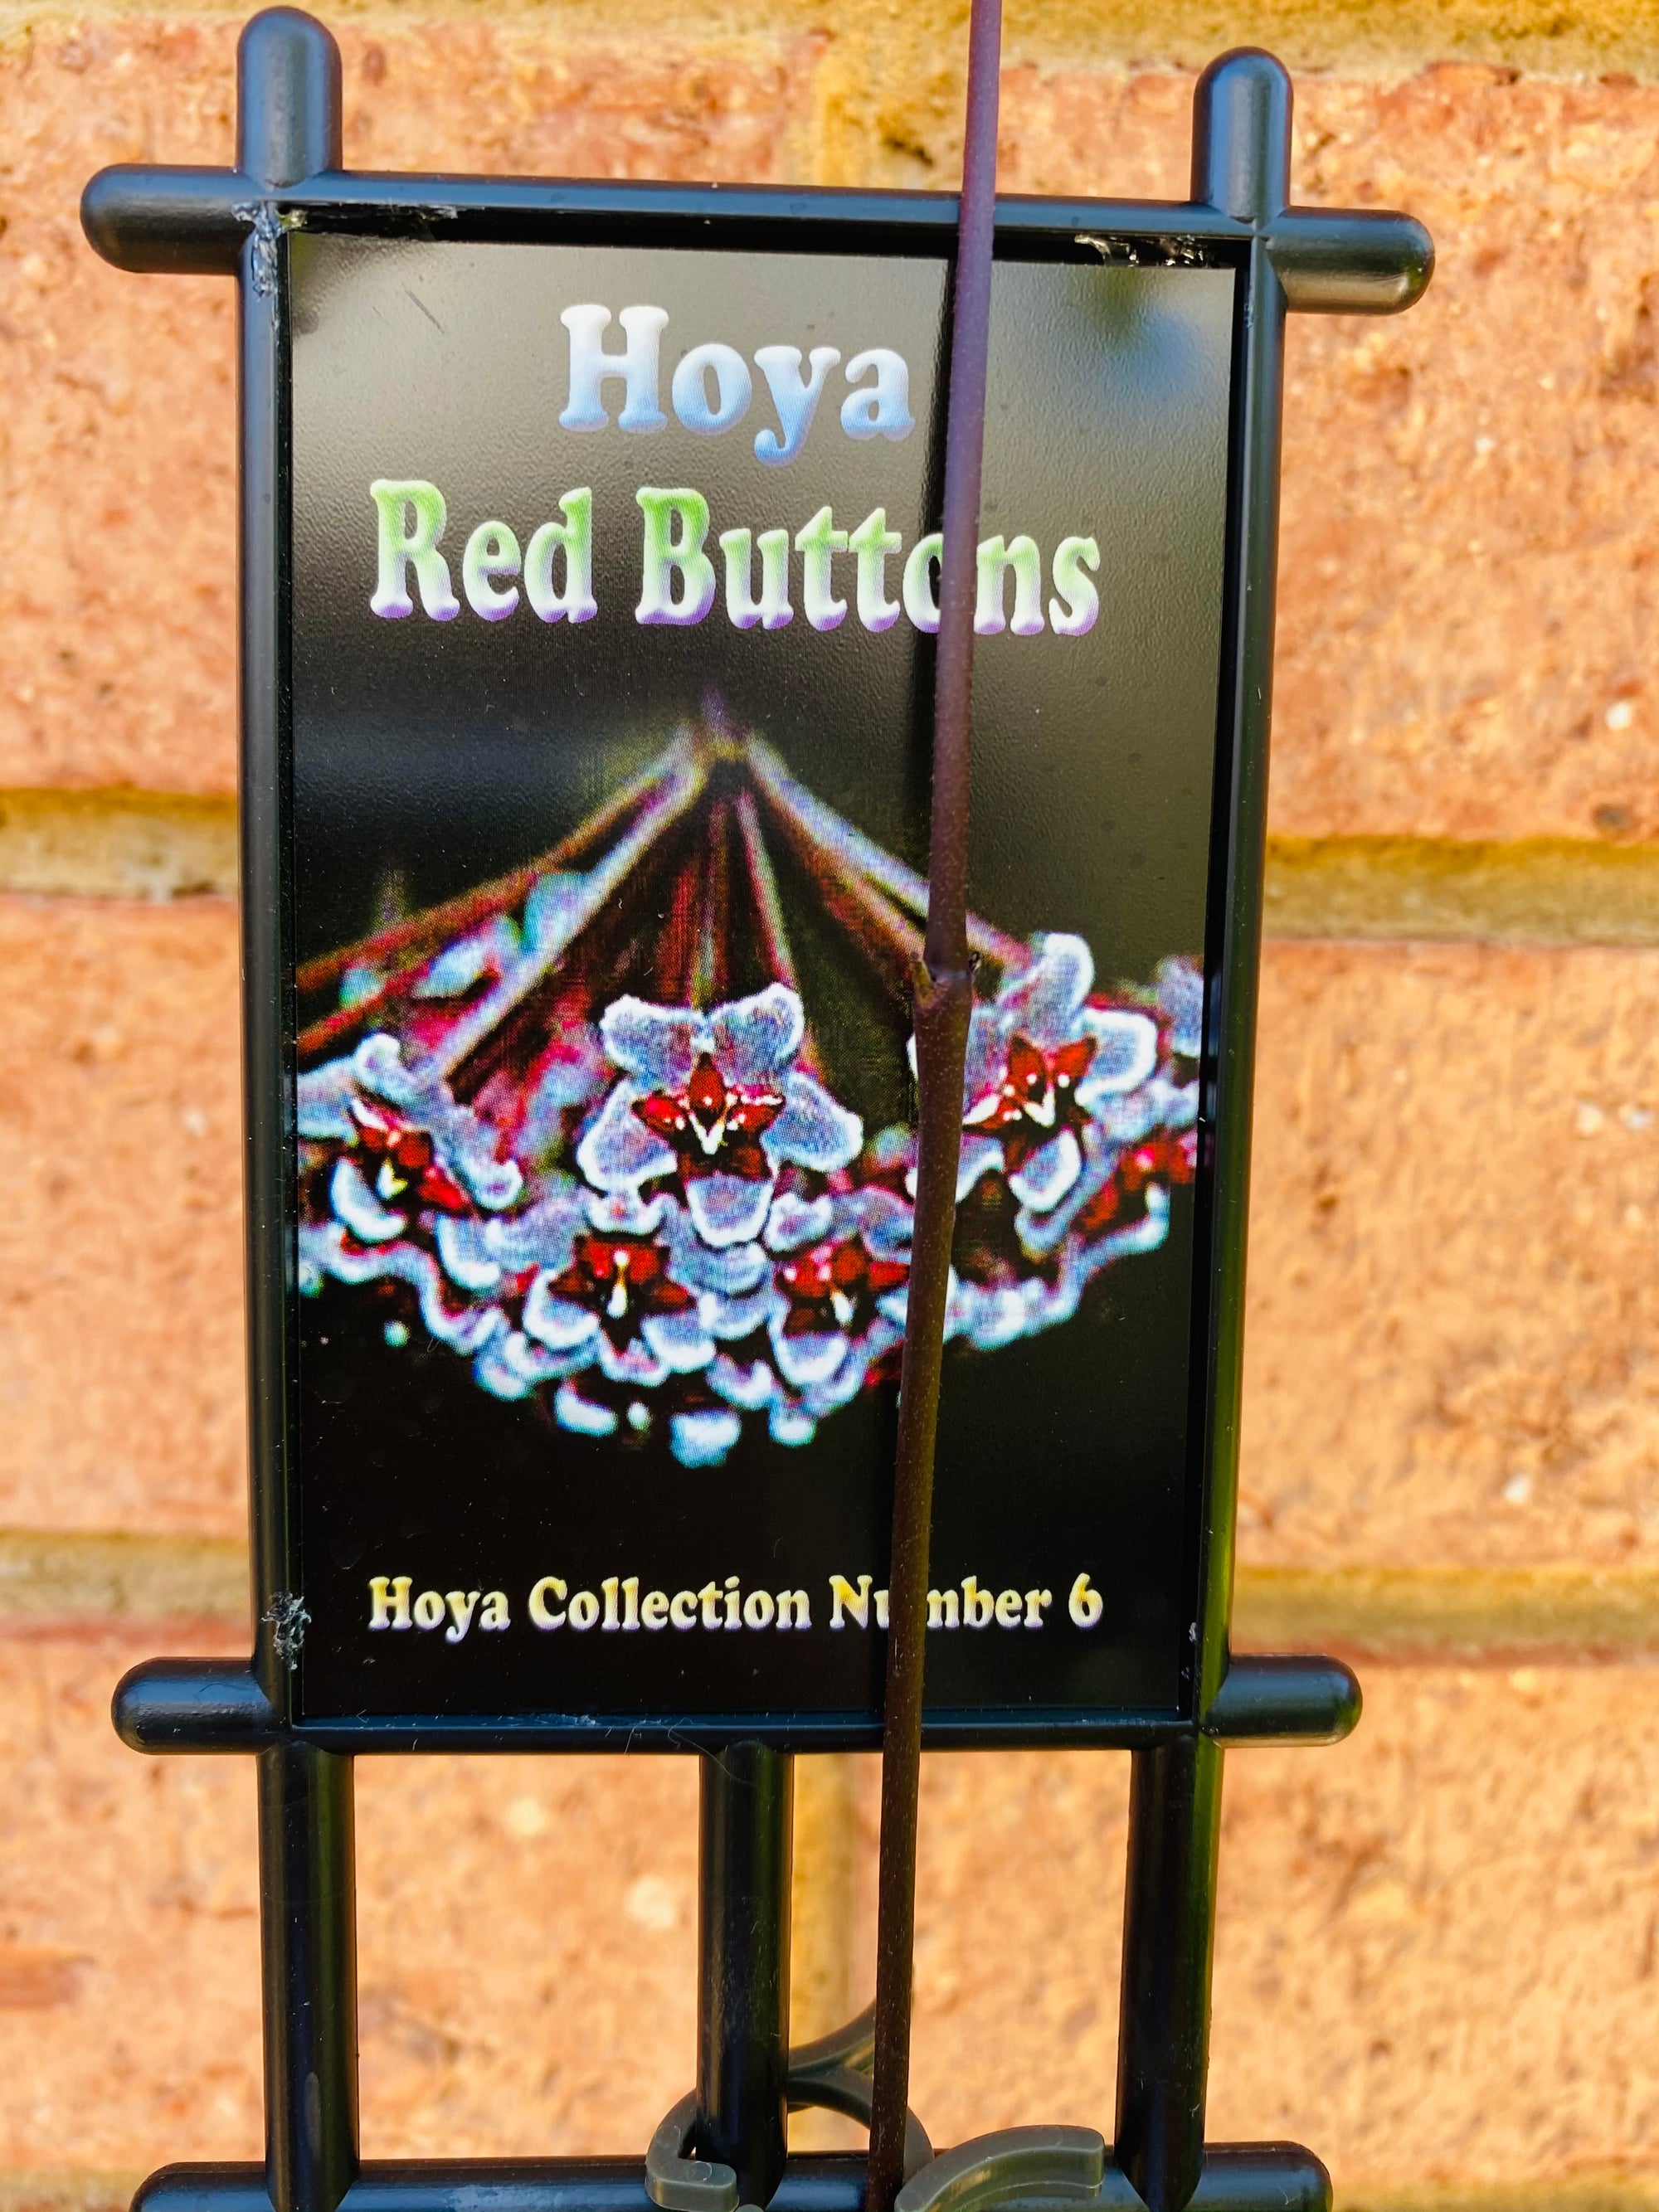 Hoya - Red Buttons Collection No. 6